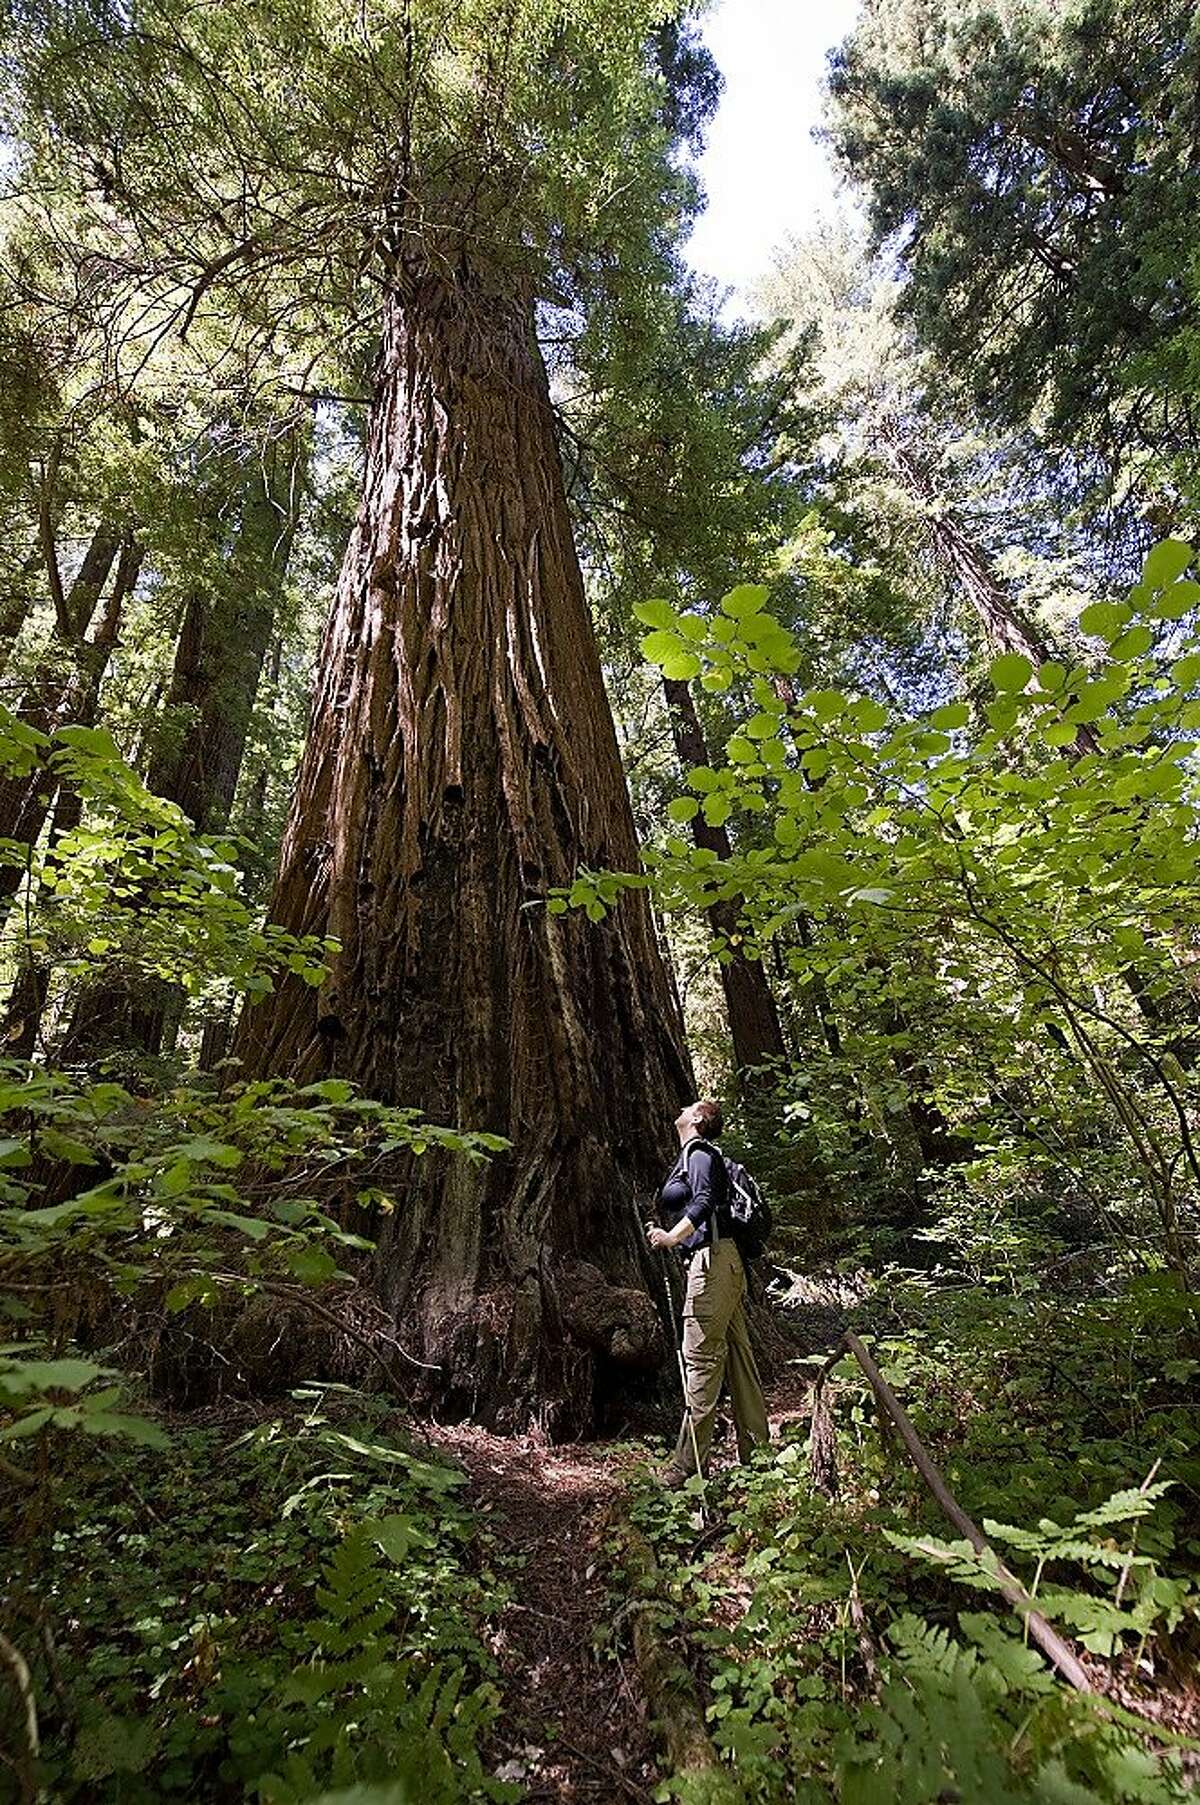 A hiker explores Portola Redwoods State Park, which has reopened after the wildfire.